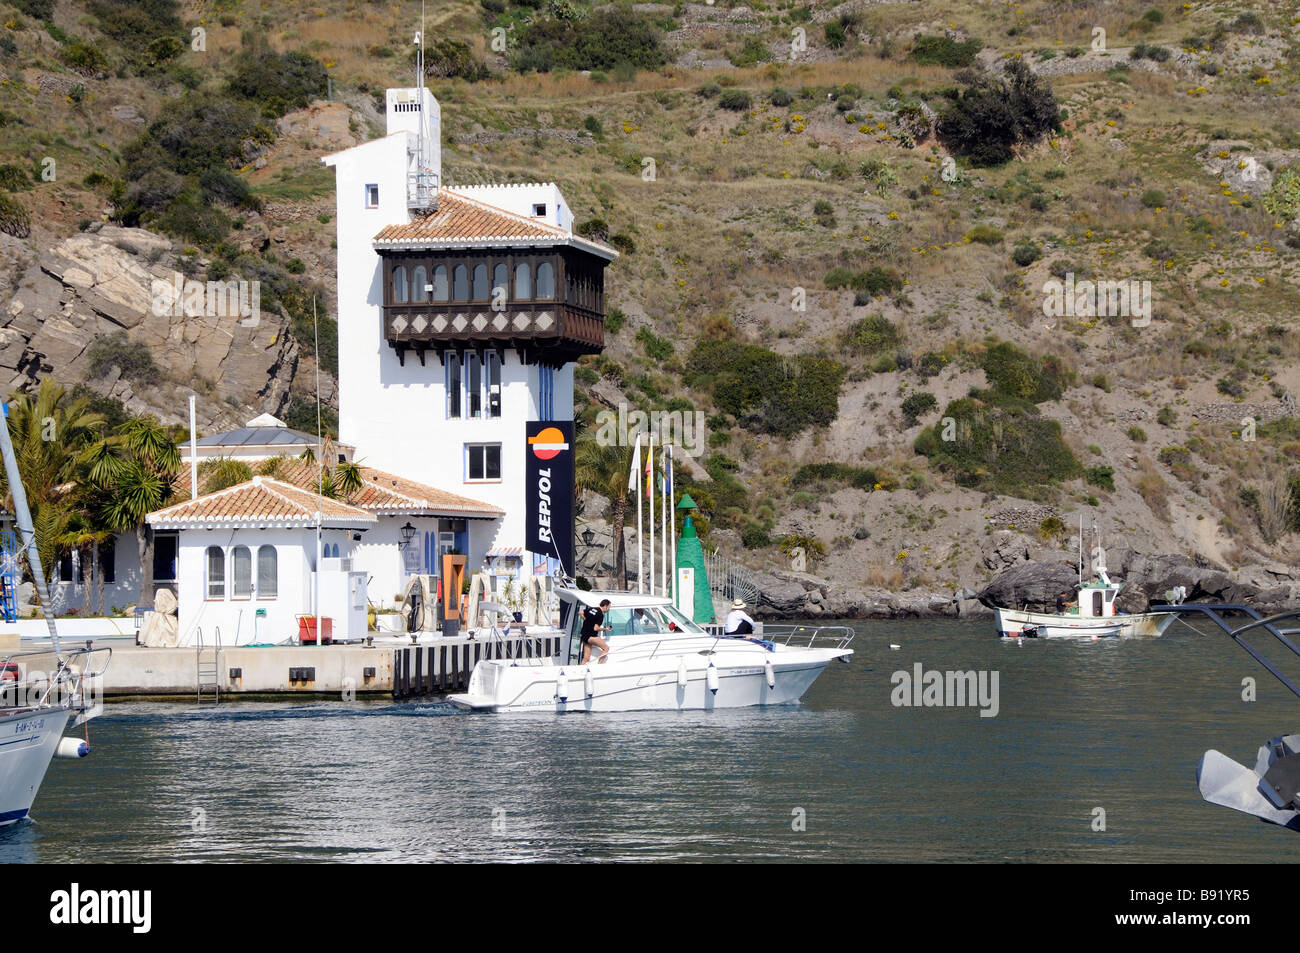 Marina del Este on the Costa Tropical Andalucia southern Spain Leiusre boats passing the fuel dock Stock Photo